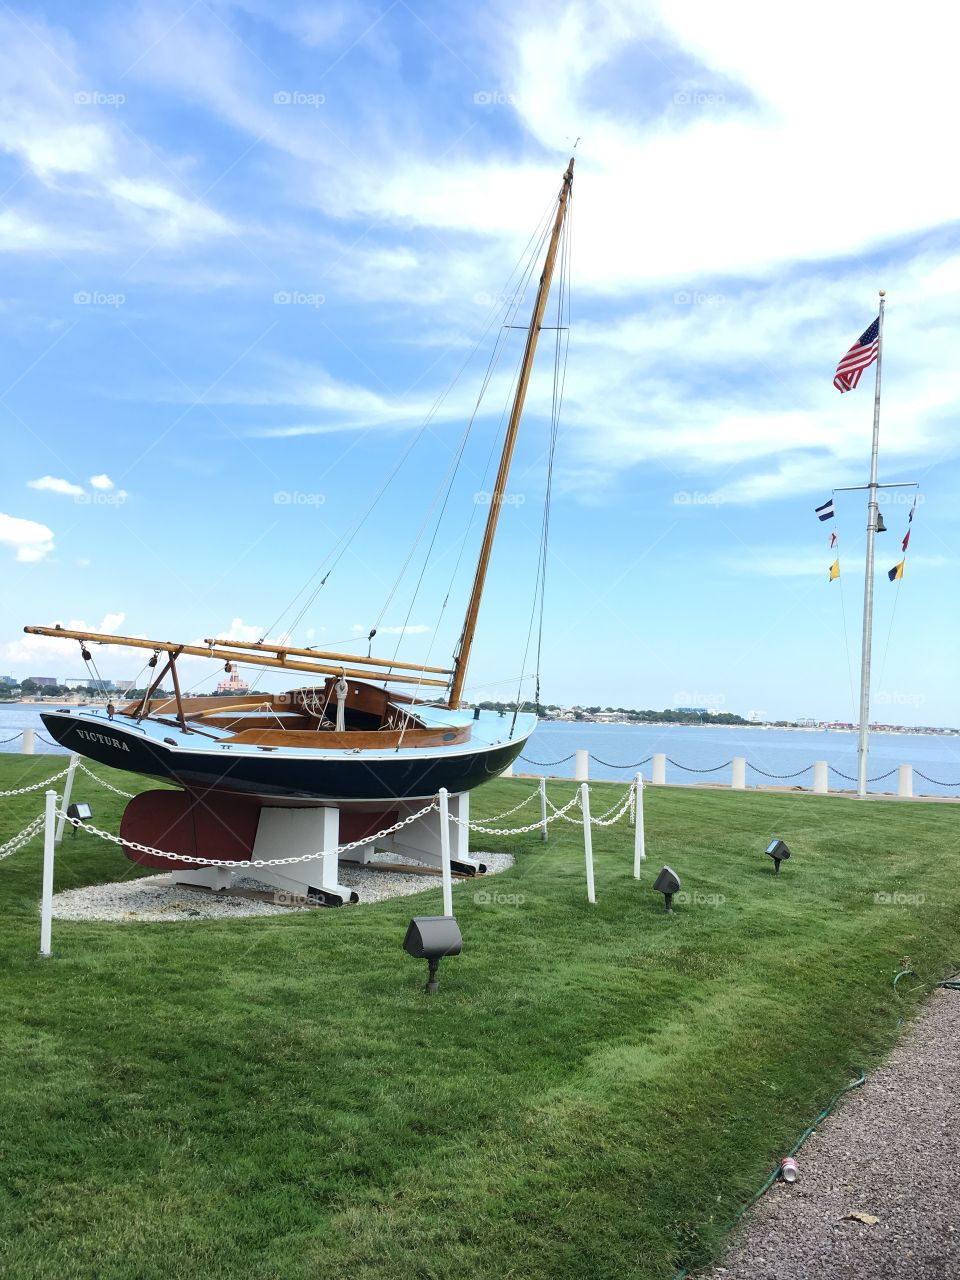 John F. Kennedy's sailboat, Victura, at the JFK museum in Boston